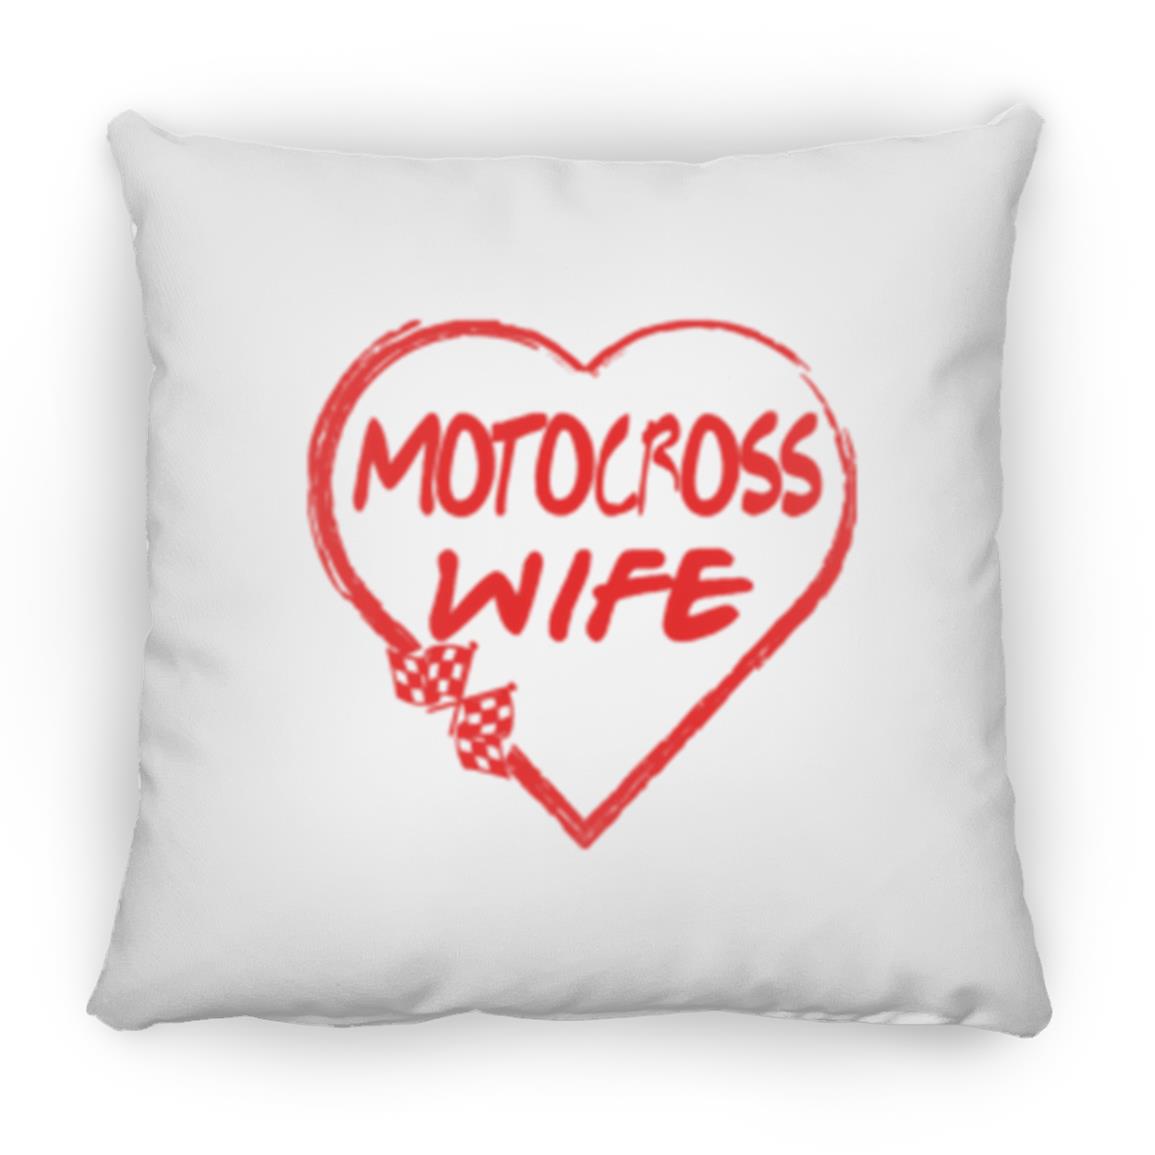 Motocross Wife Large Square Pillow